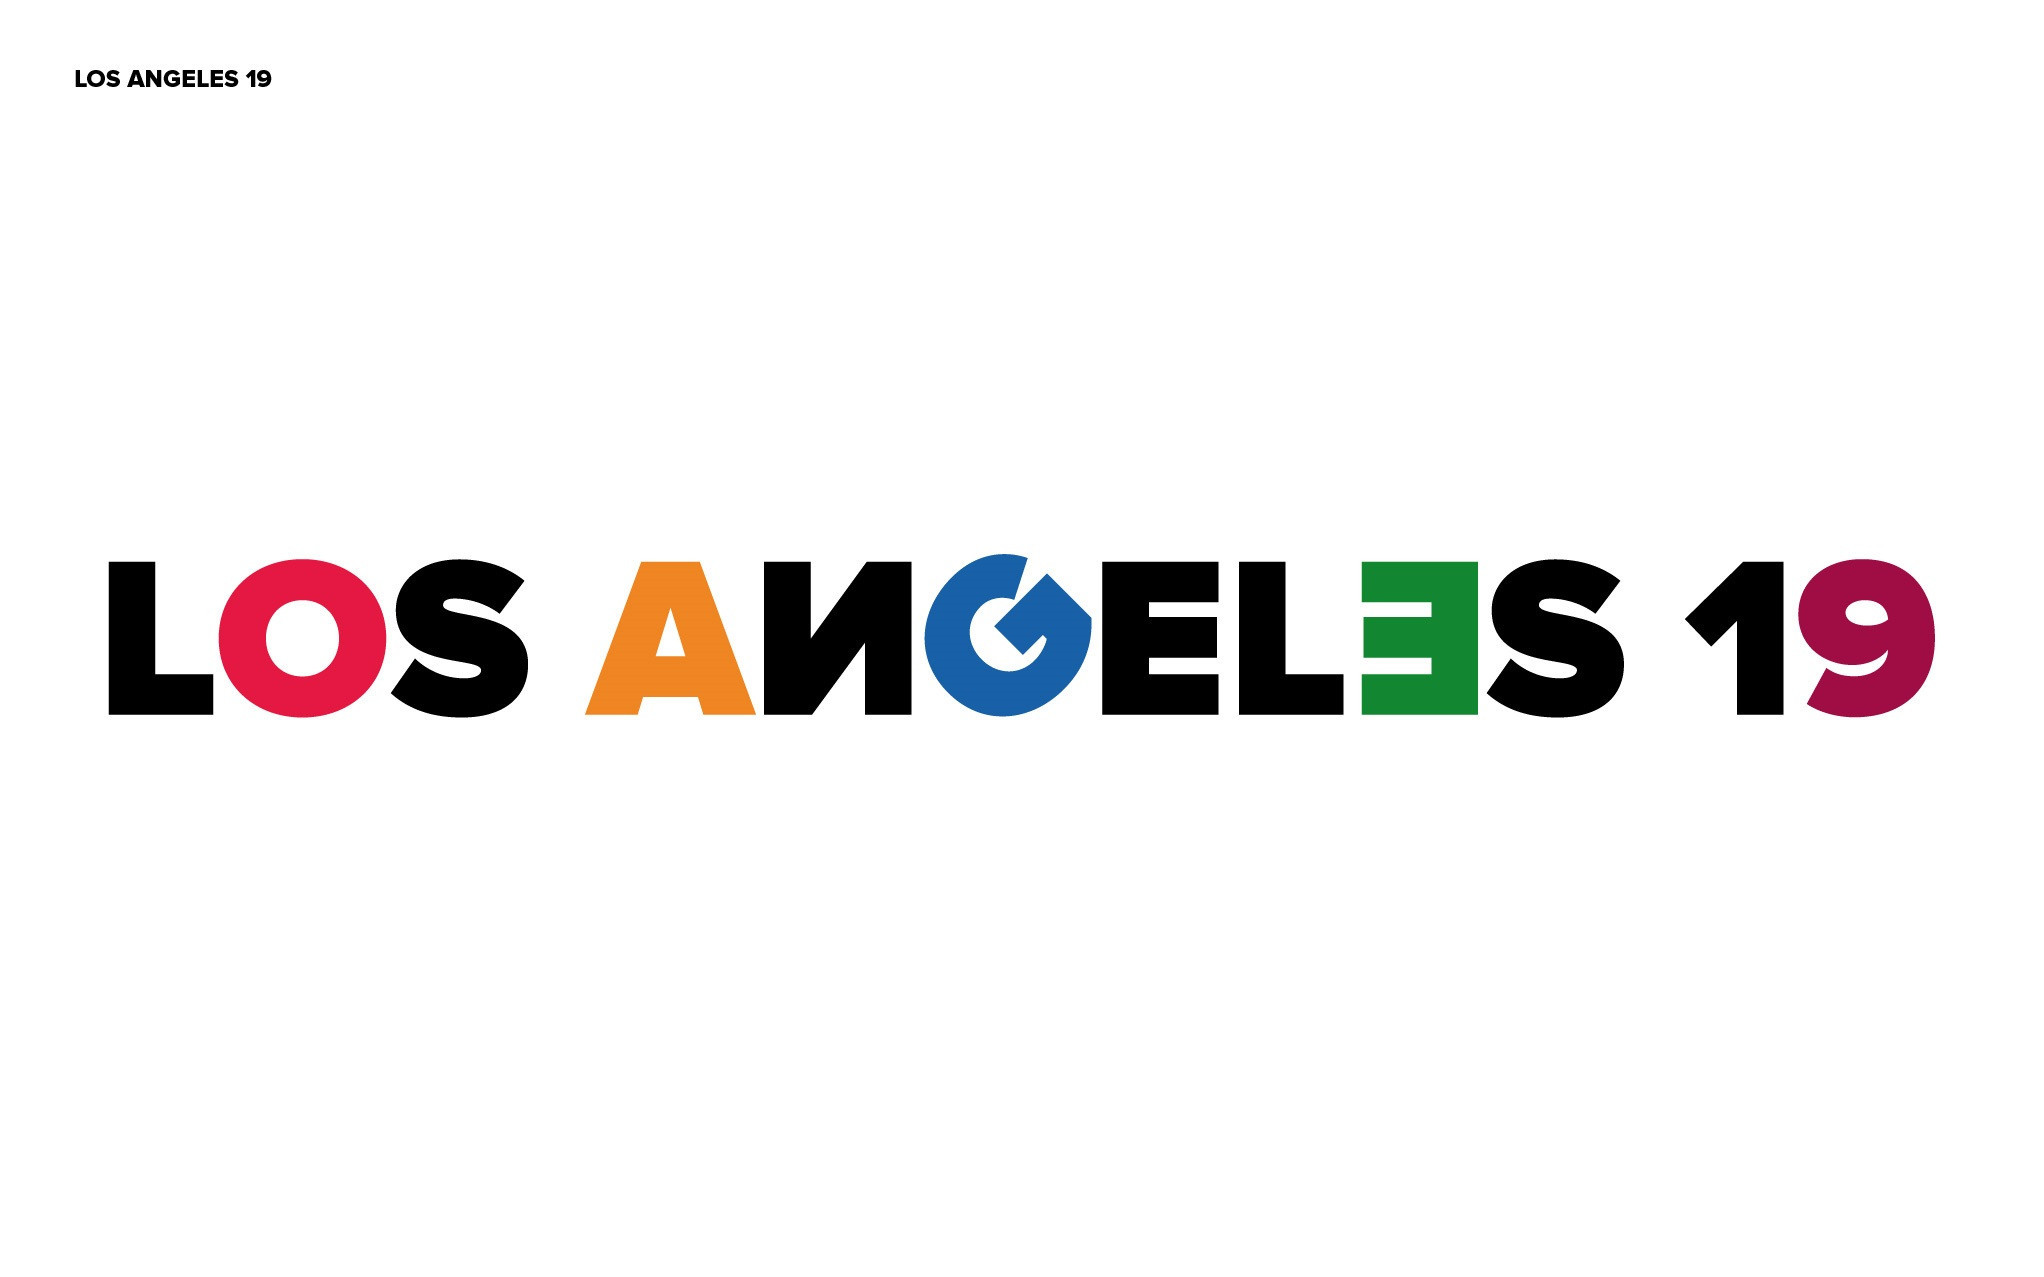 Los Angeles to host first editions of World Urban Games in 2019 and 2021